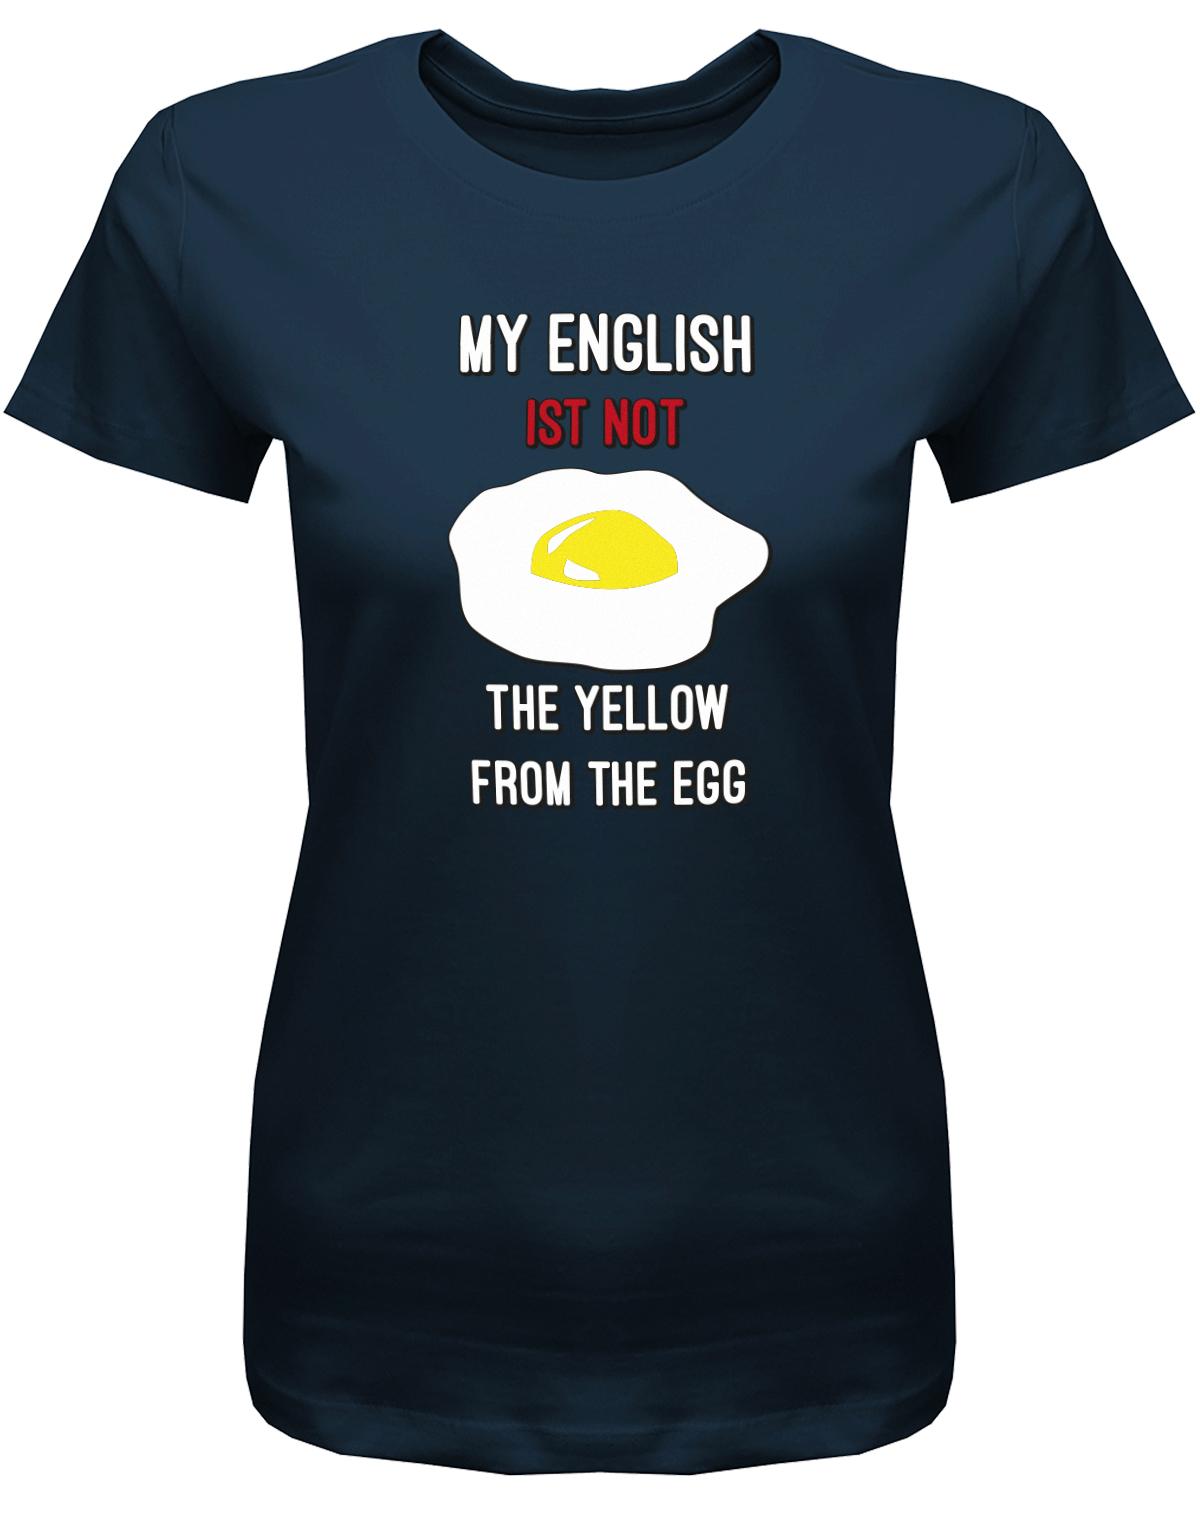 My-English-is-not-the-yellow-from-the-egg-Damen-Shirt-Navy